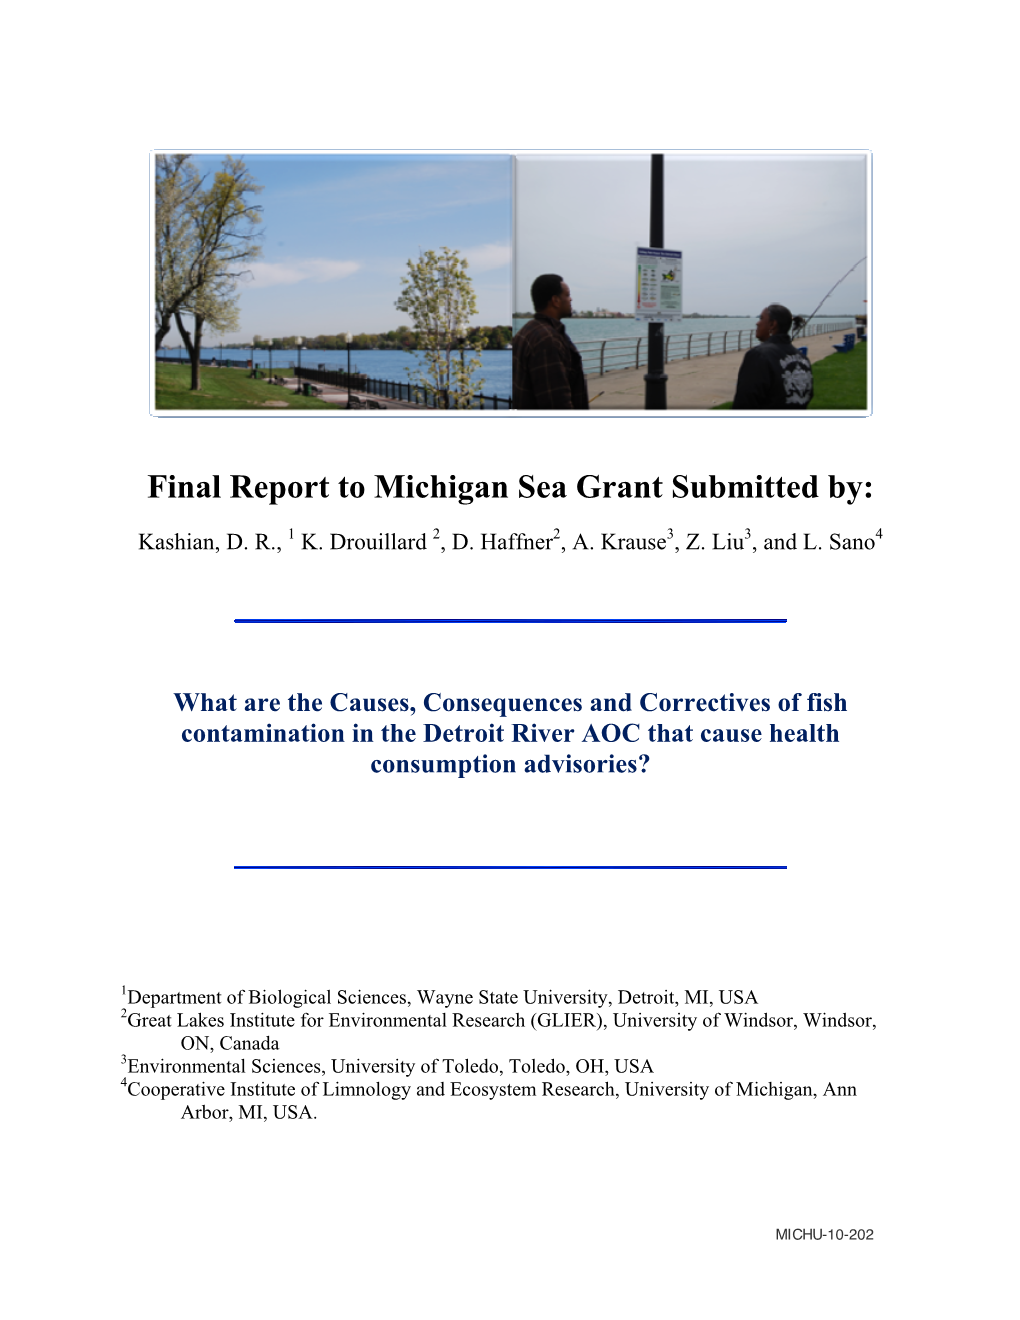 Final Report to Michigan Sea Grant Submitted By